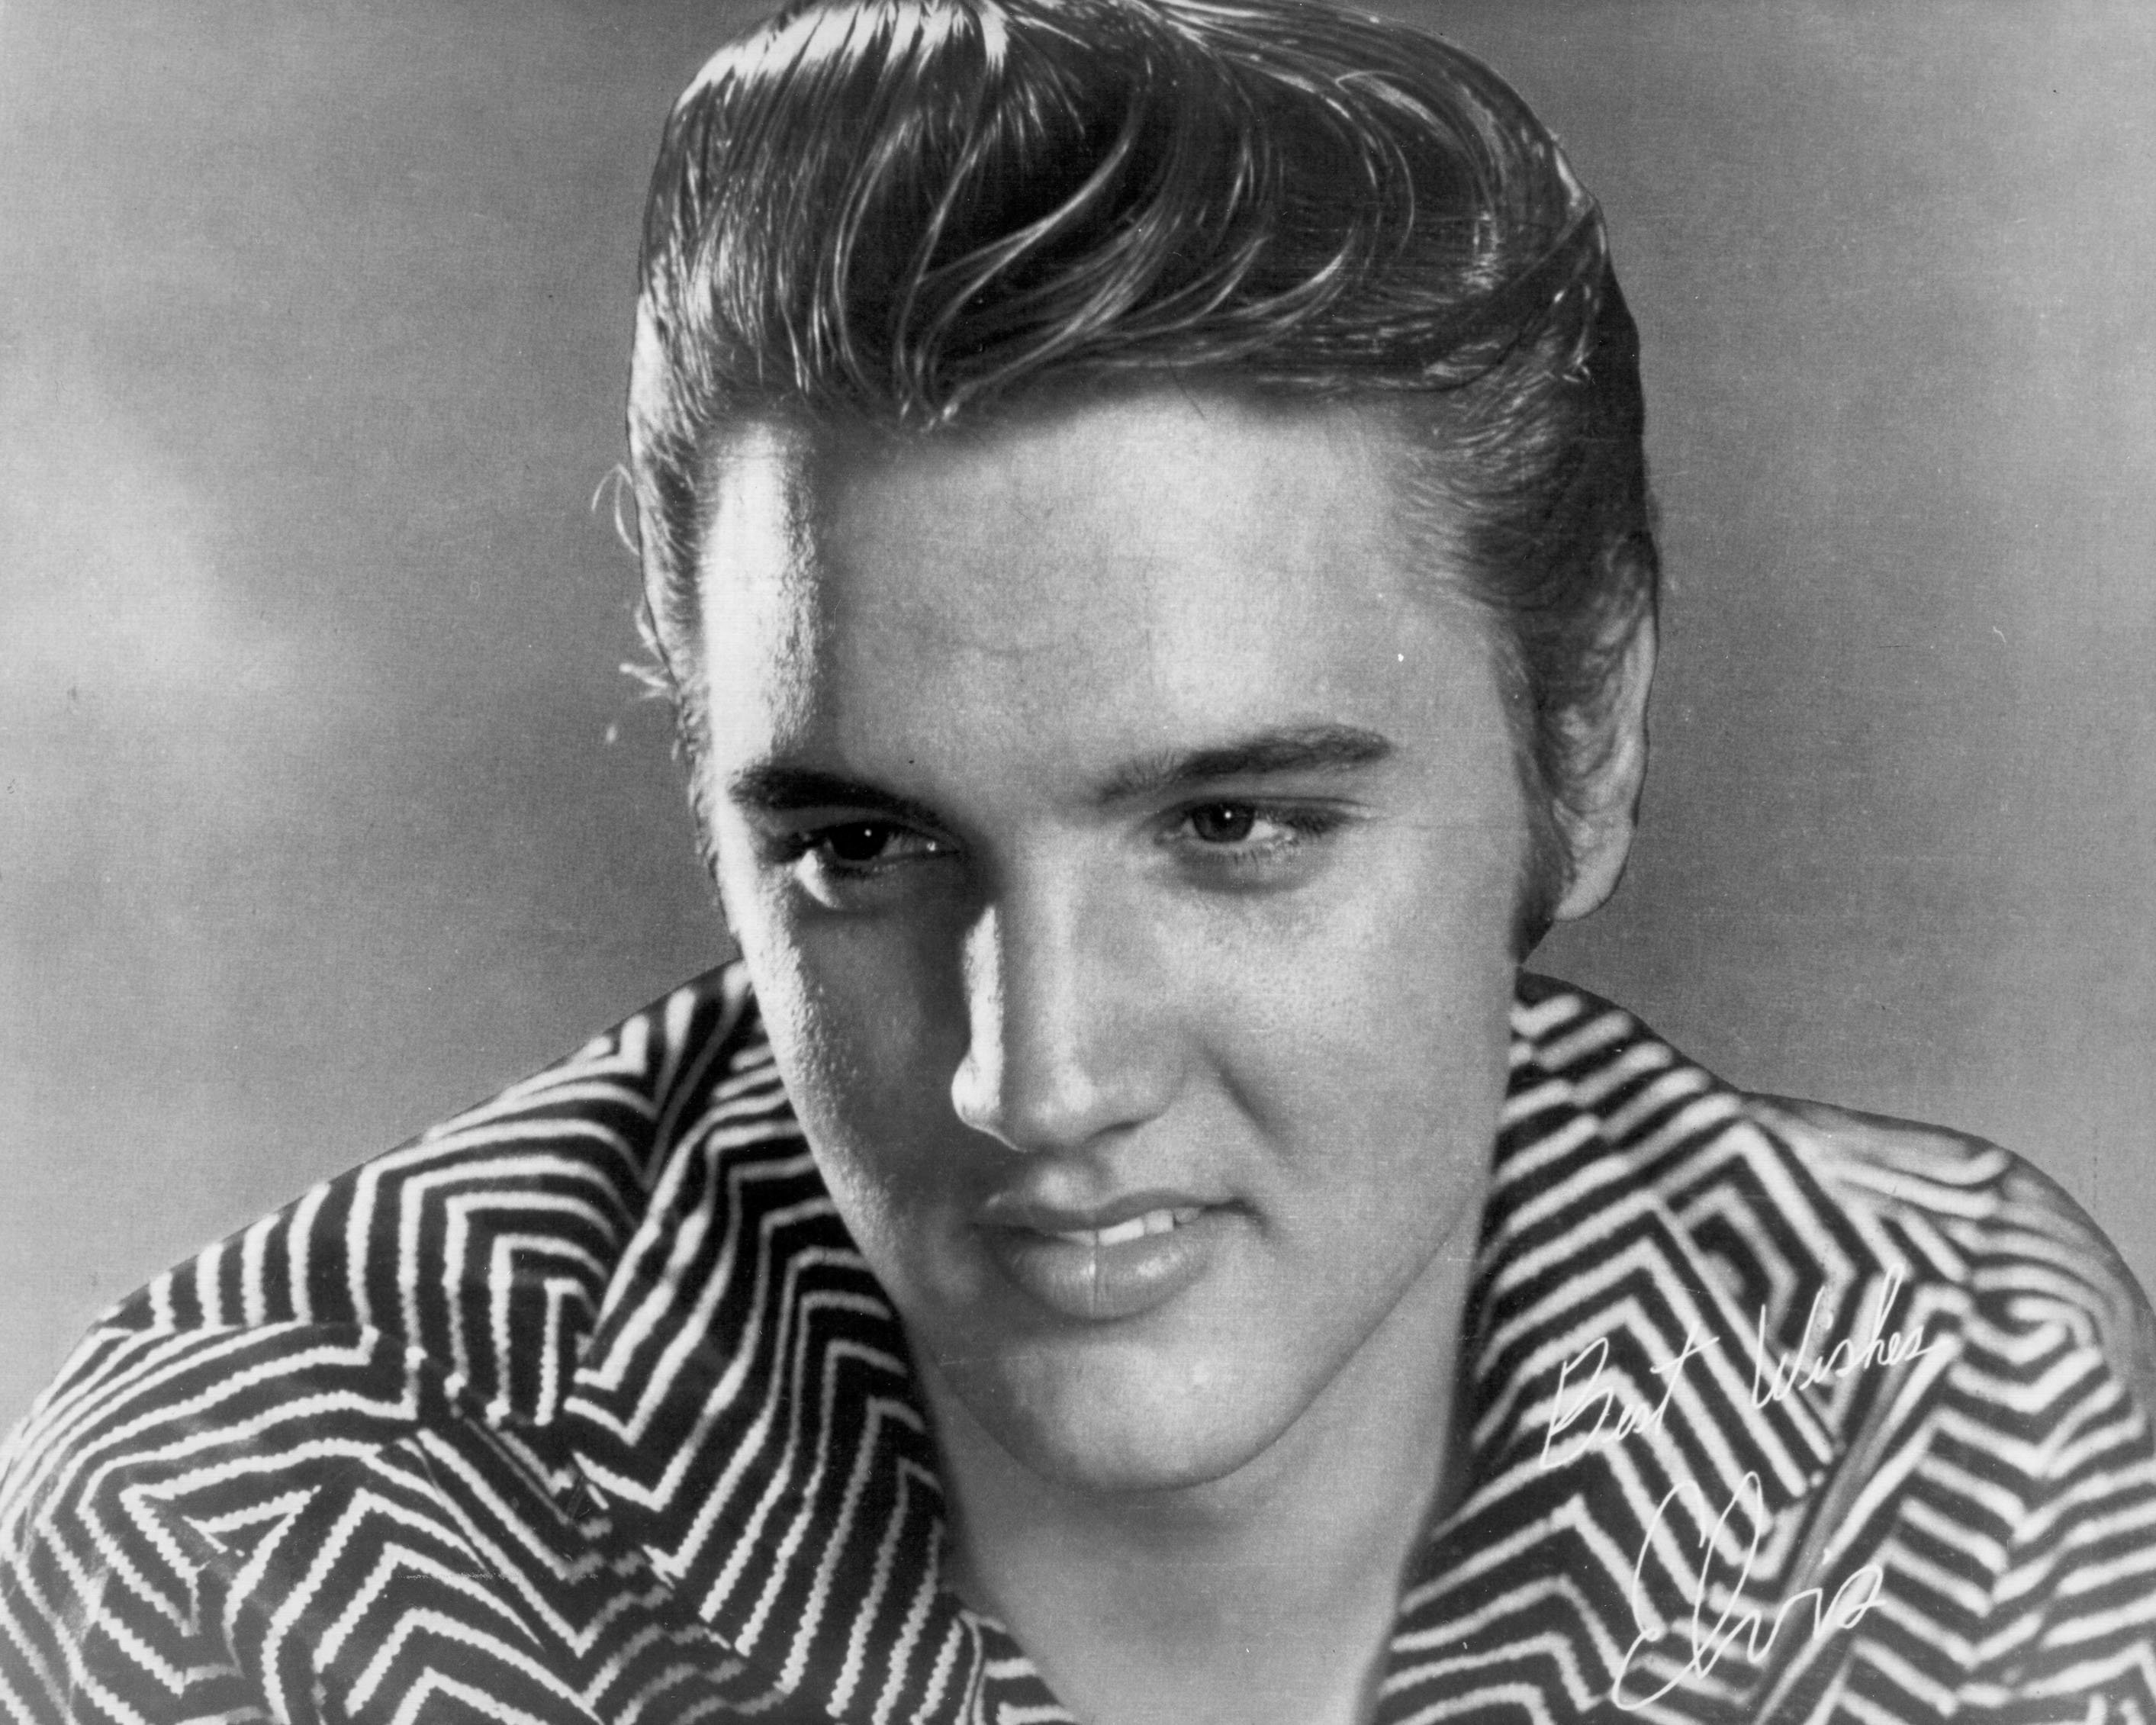 An autographed image of Elvis Presley